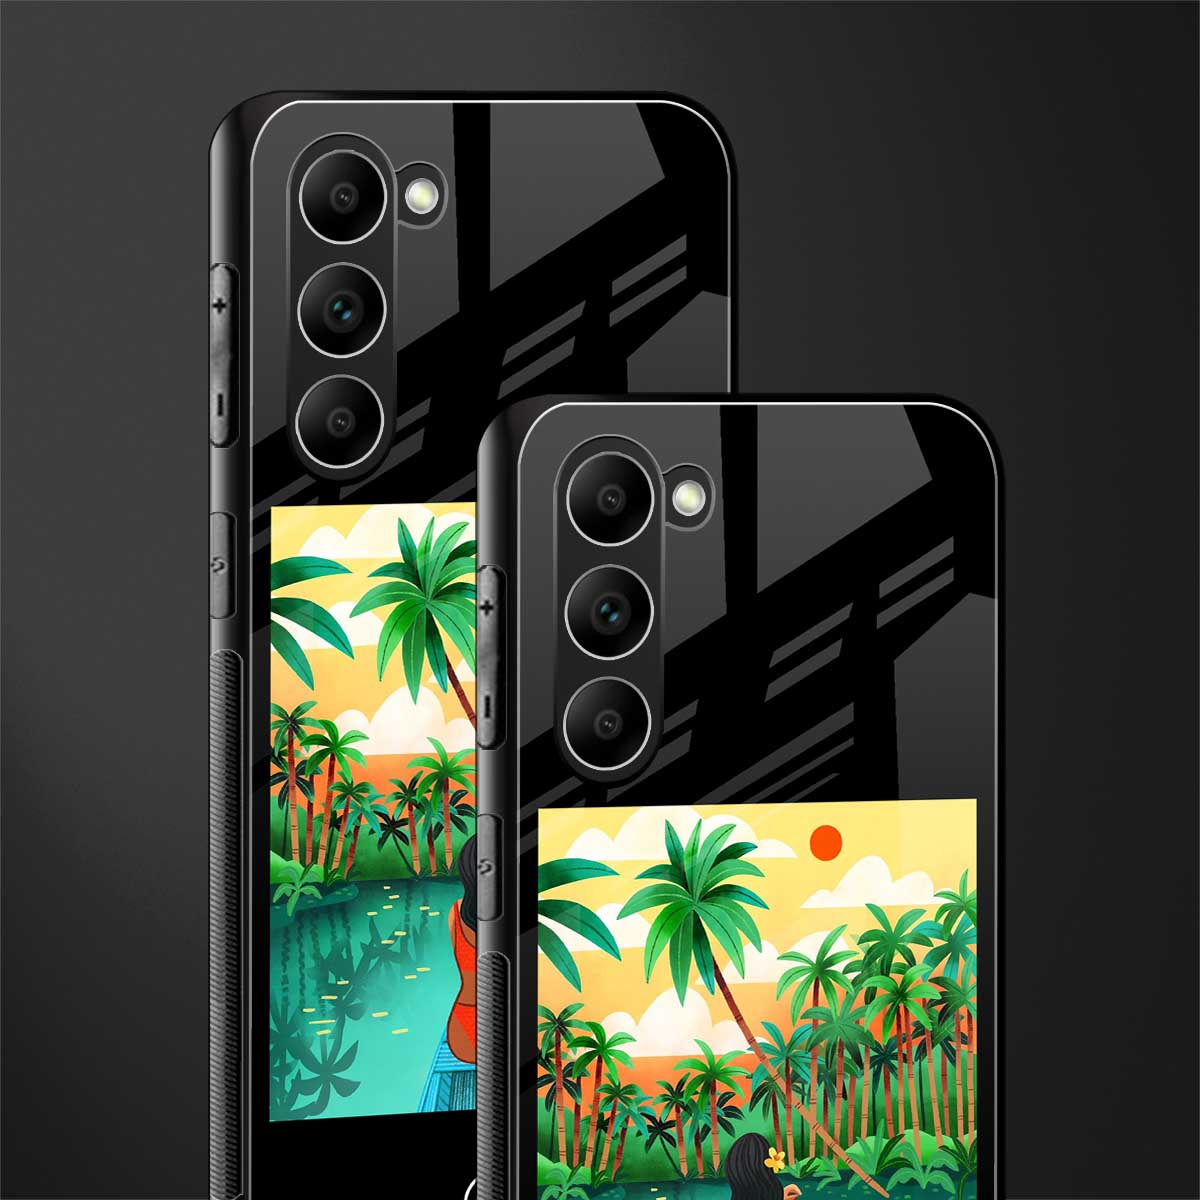 Tropical-Girl-Glass-Case for phone case | glass case for samsung galaxy s23 plus